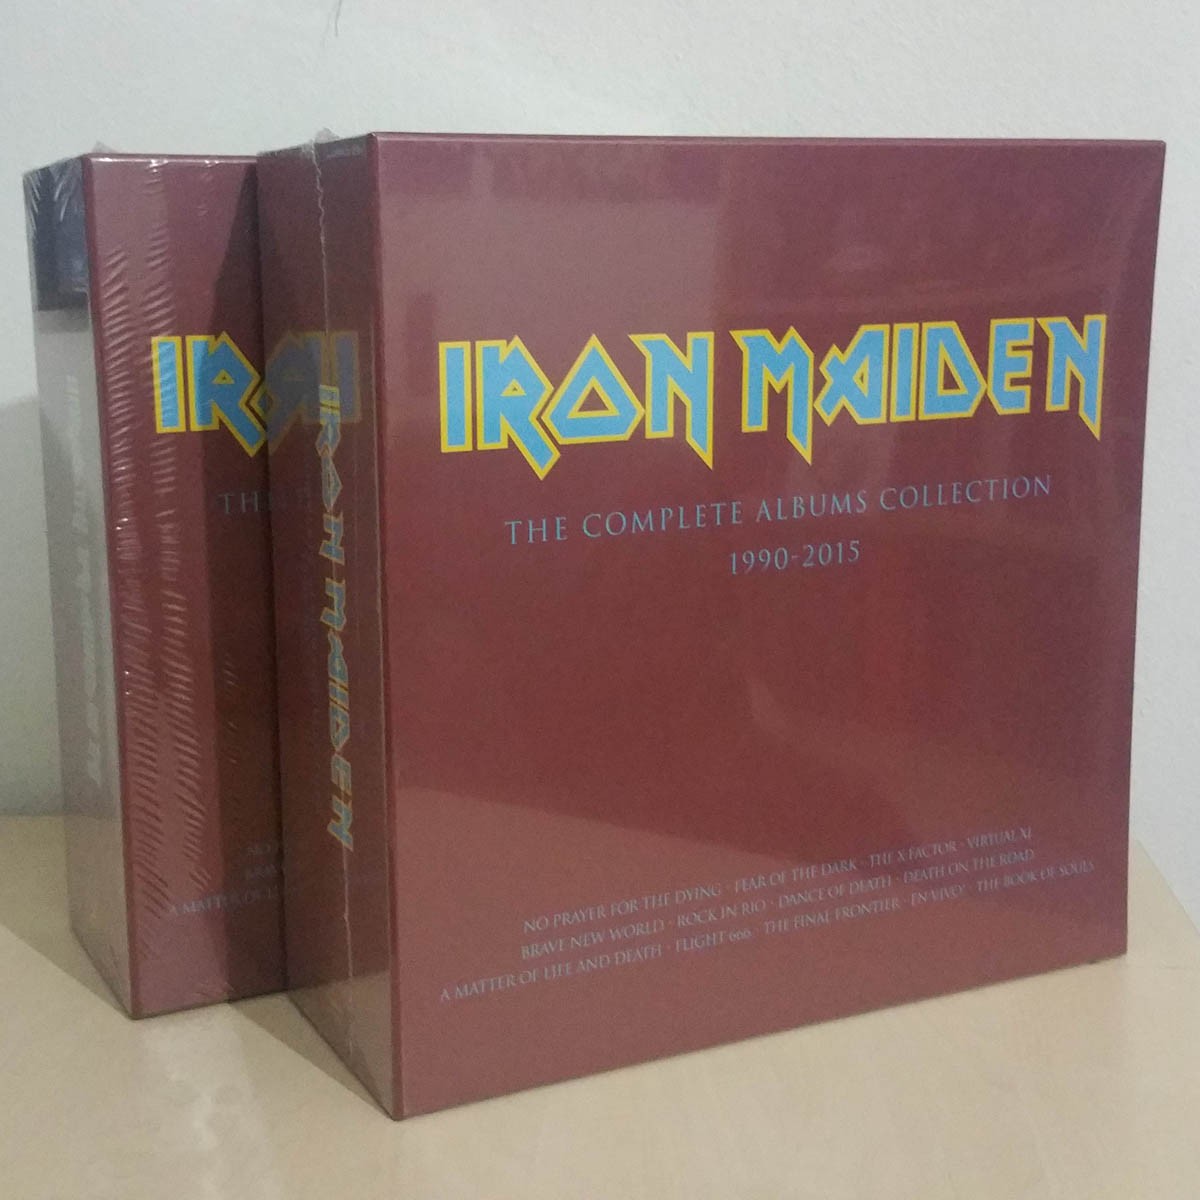 Iron Maiden The Complete Albums Collection 1989-2015 Box Set - Iron Maiden Collector